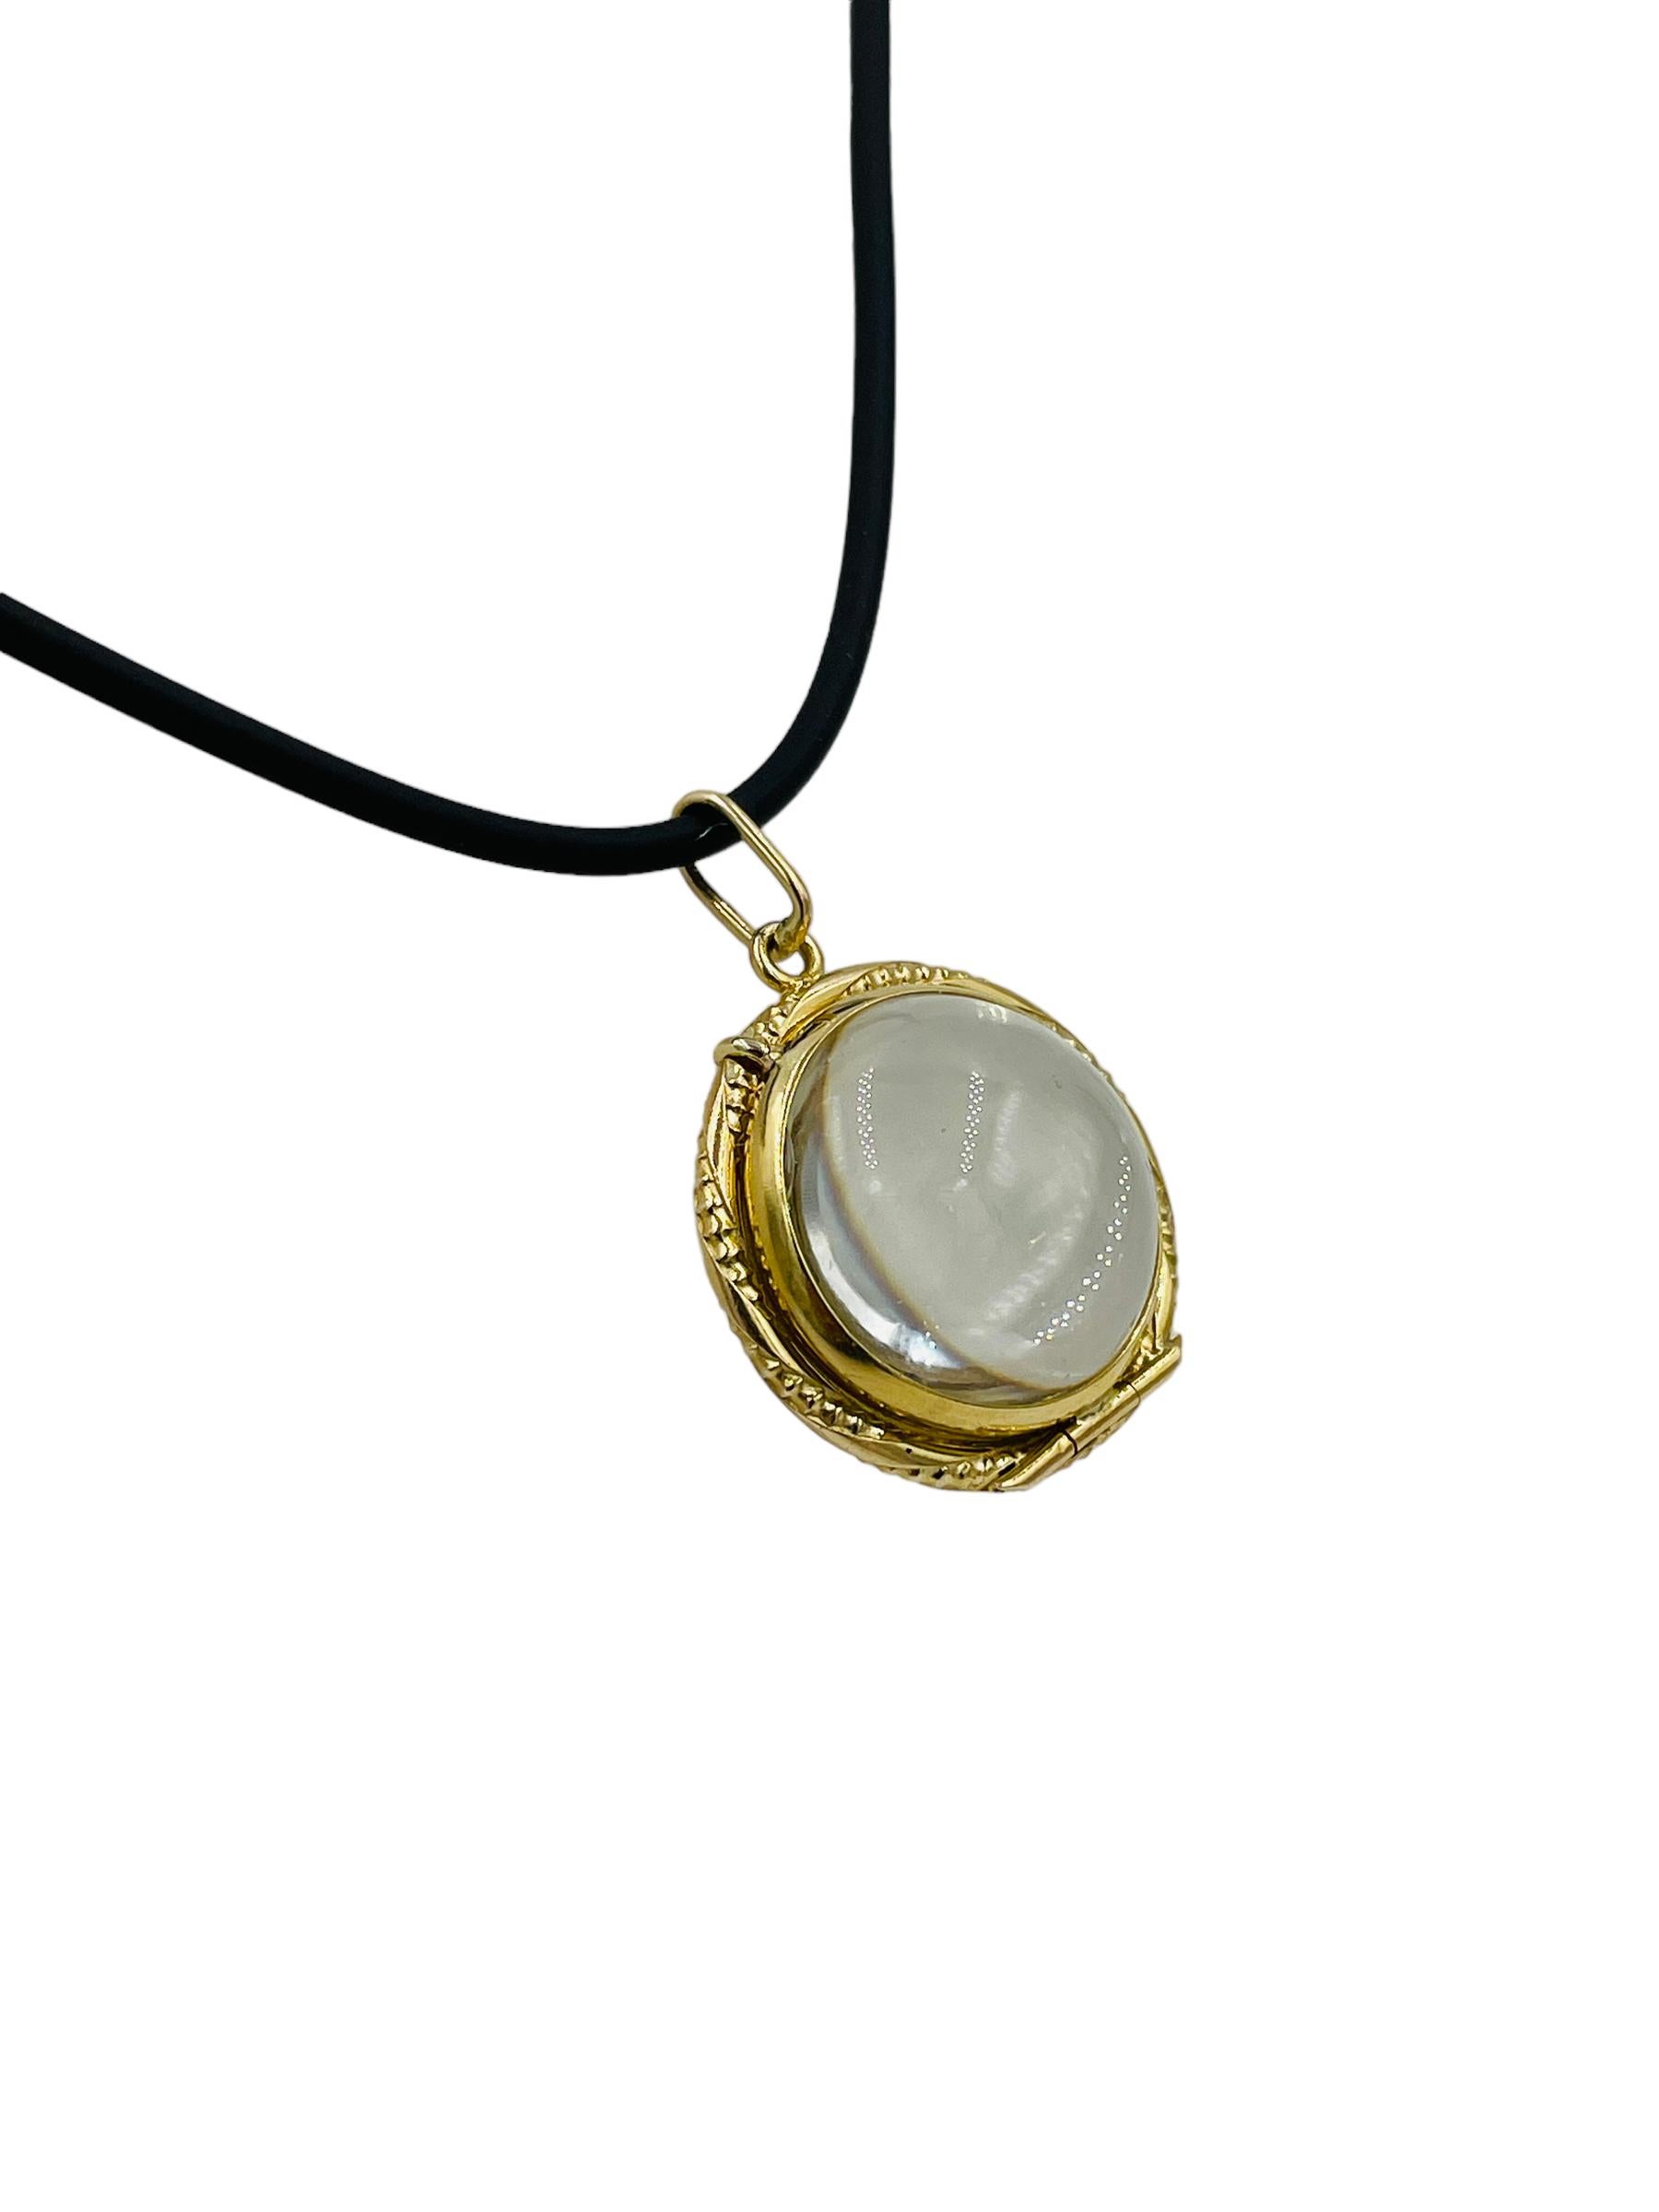  Victorian Pools Of Light 14k Yellow Gold Locket, Ca 1890.

 ABOUT THIS ITEM:  This locket is called Pools of Light because of the reflection of light through the clear rock crystal (clear quartz) stones that form each half of the locket.  The two